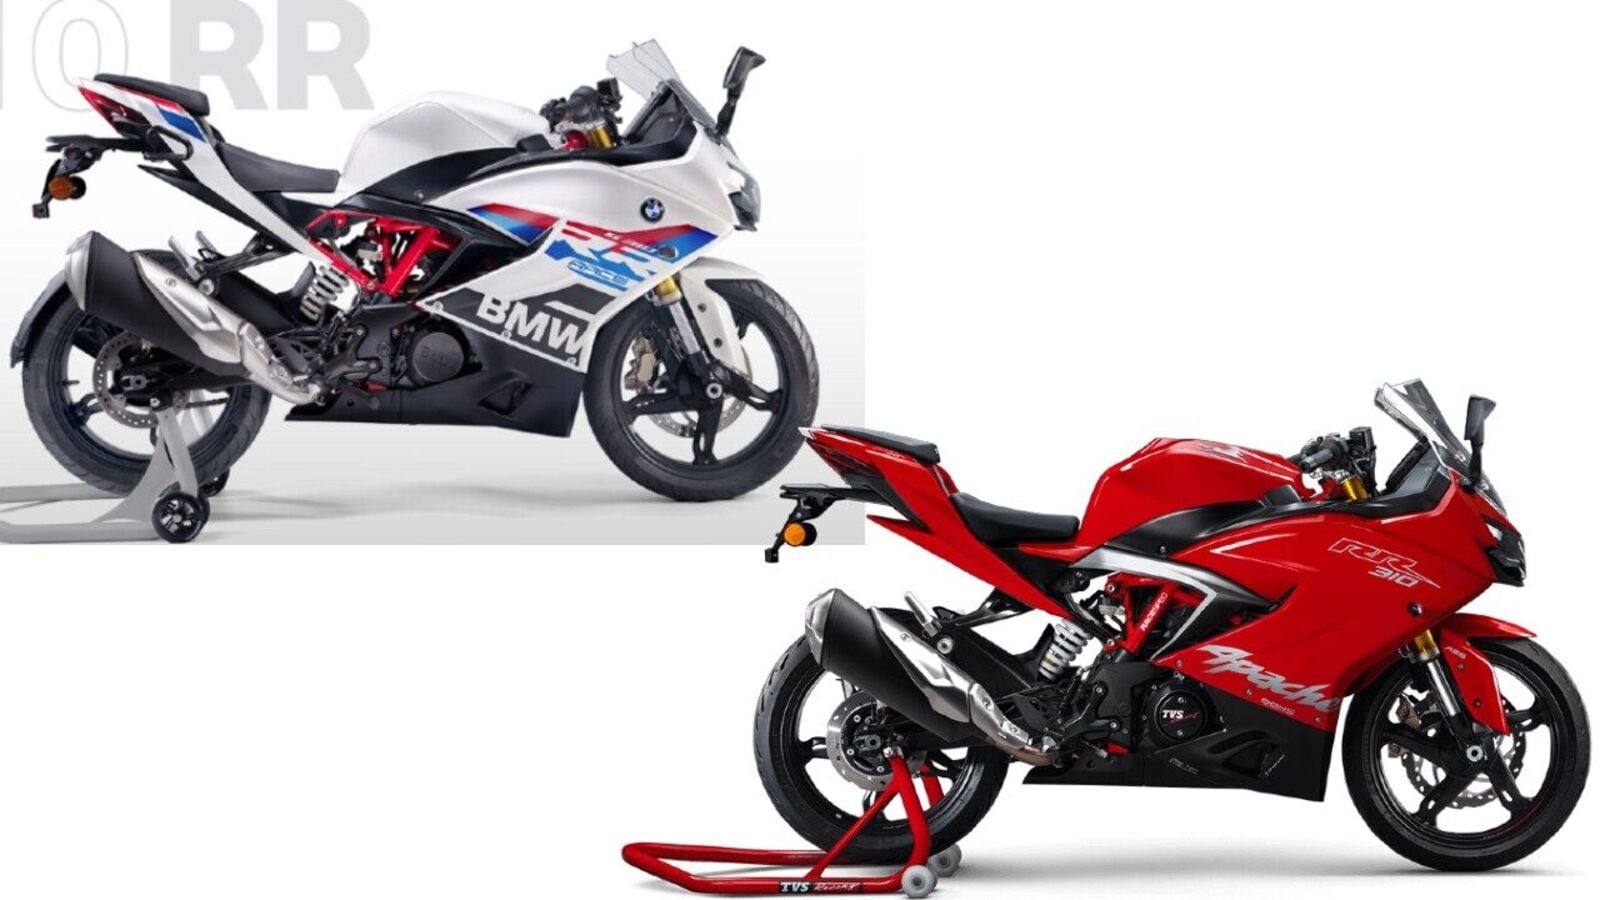 BMW G 310 RR vs TVS Apache RR 310 : Check How They Are Differ By It’s Prices & Specifications.